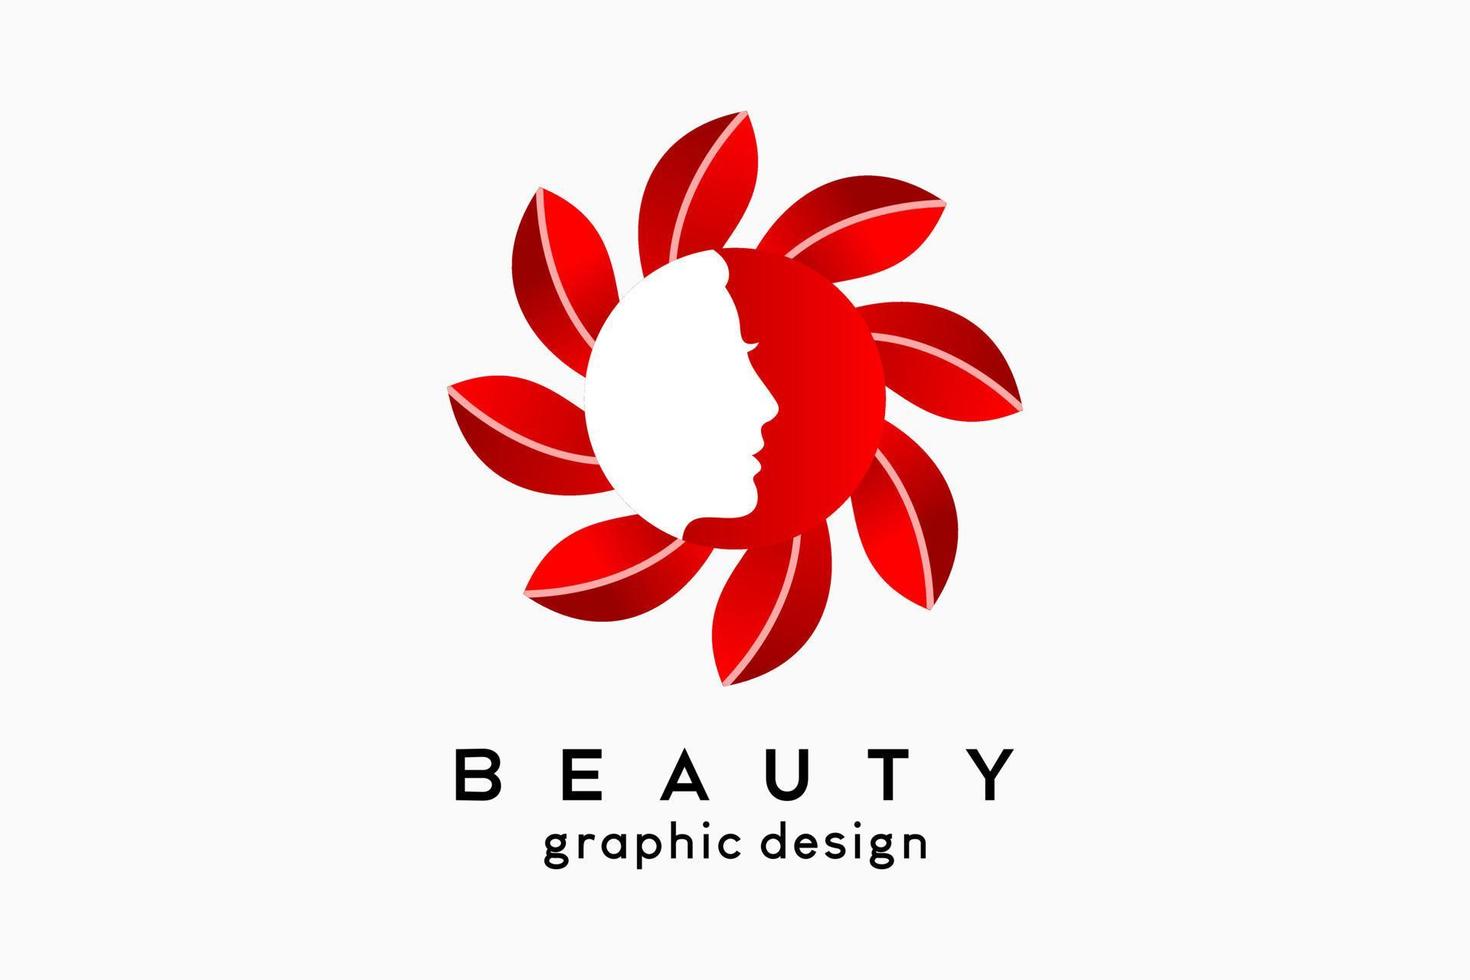 Beauty logo design with woman face concept in dots with twisted leaves elements vector